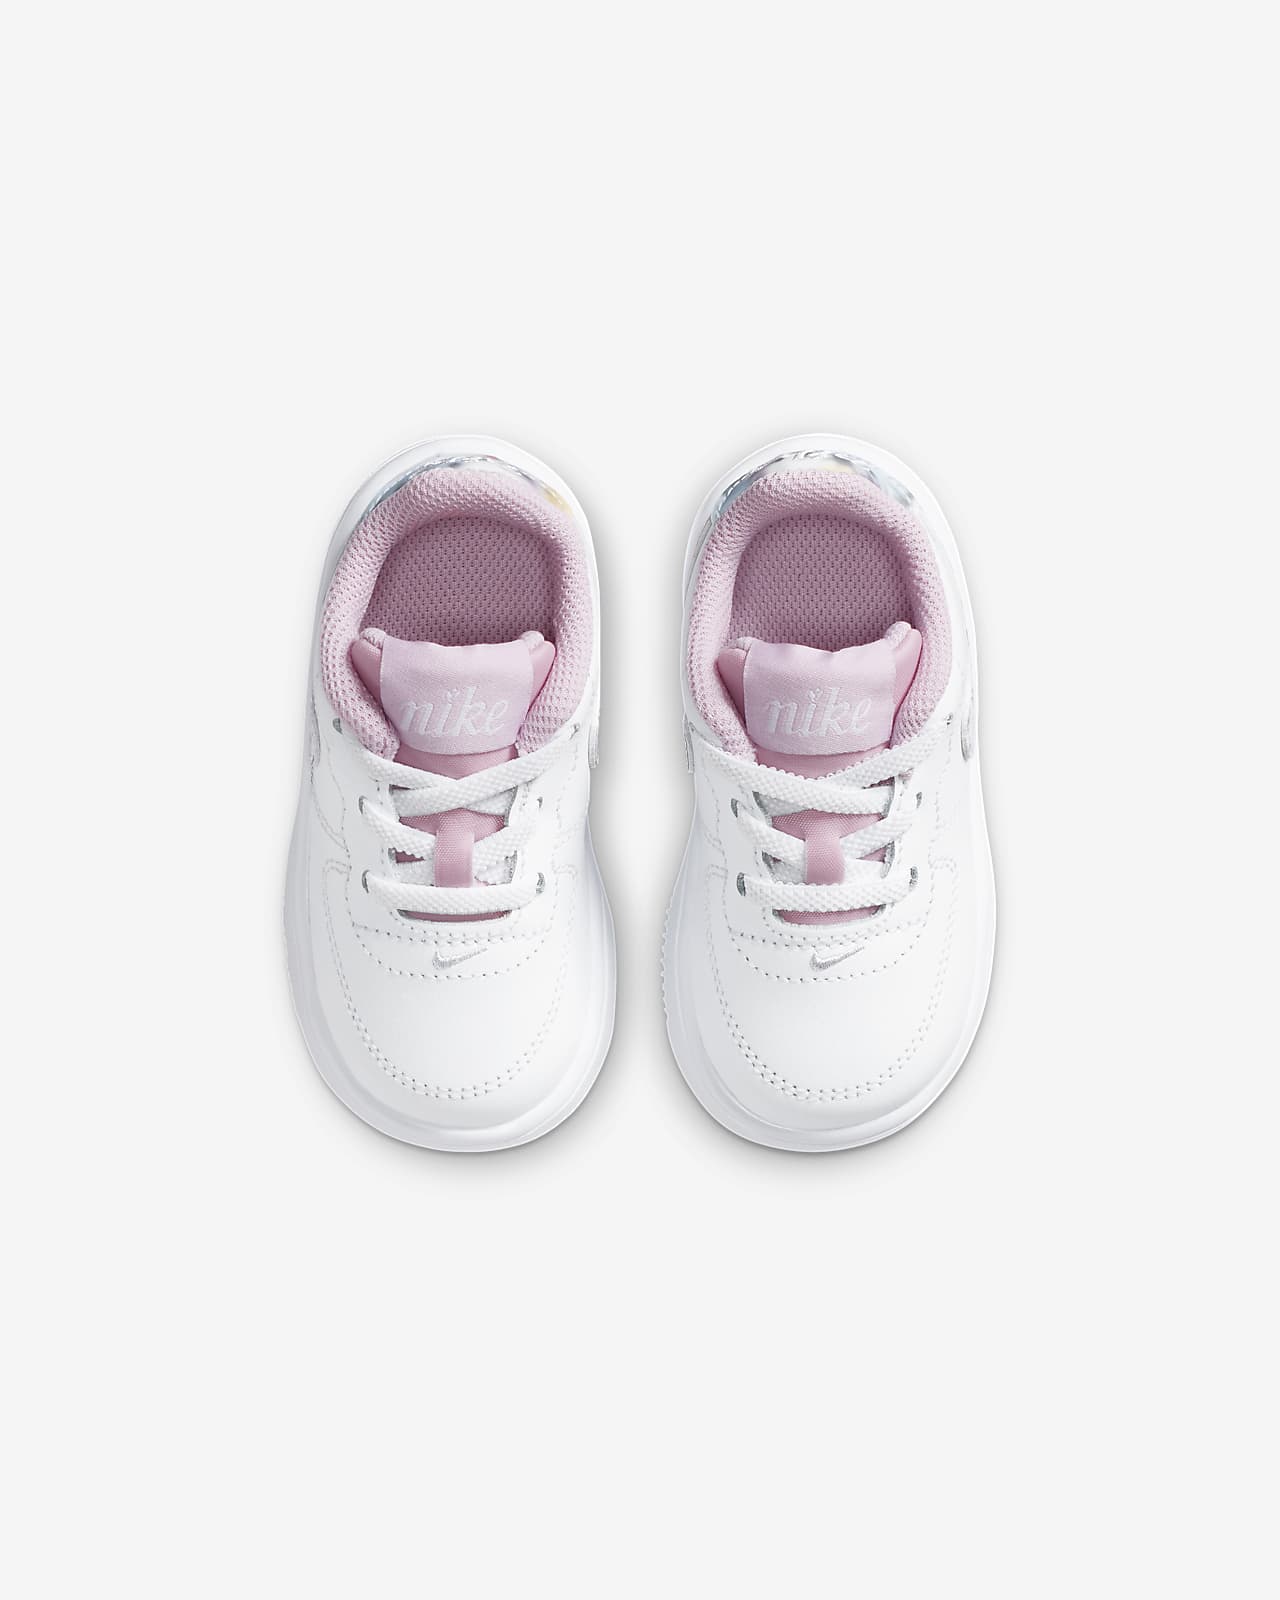 nike force 1 baby shoes